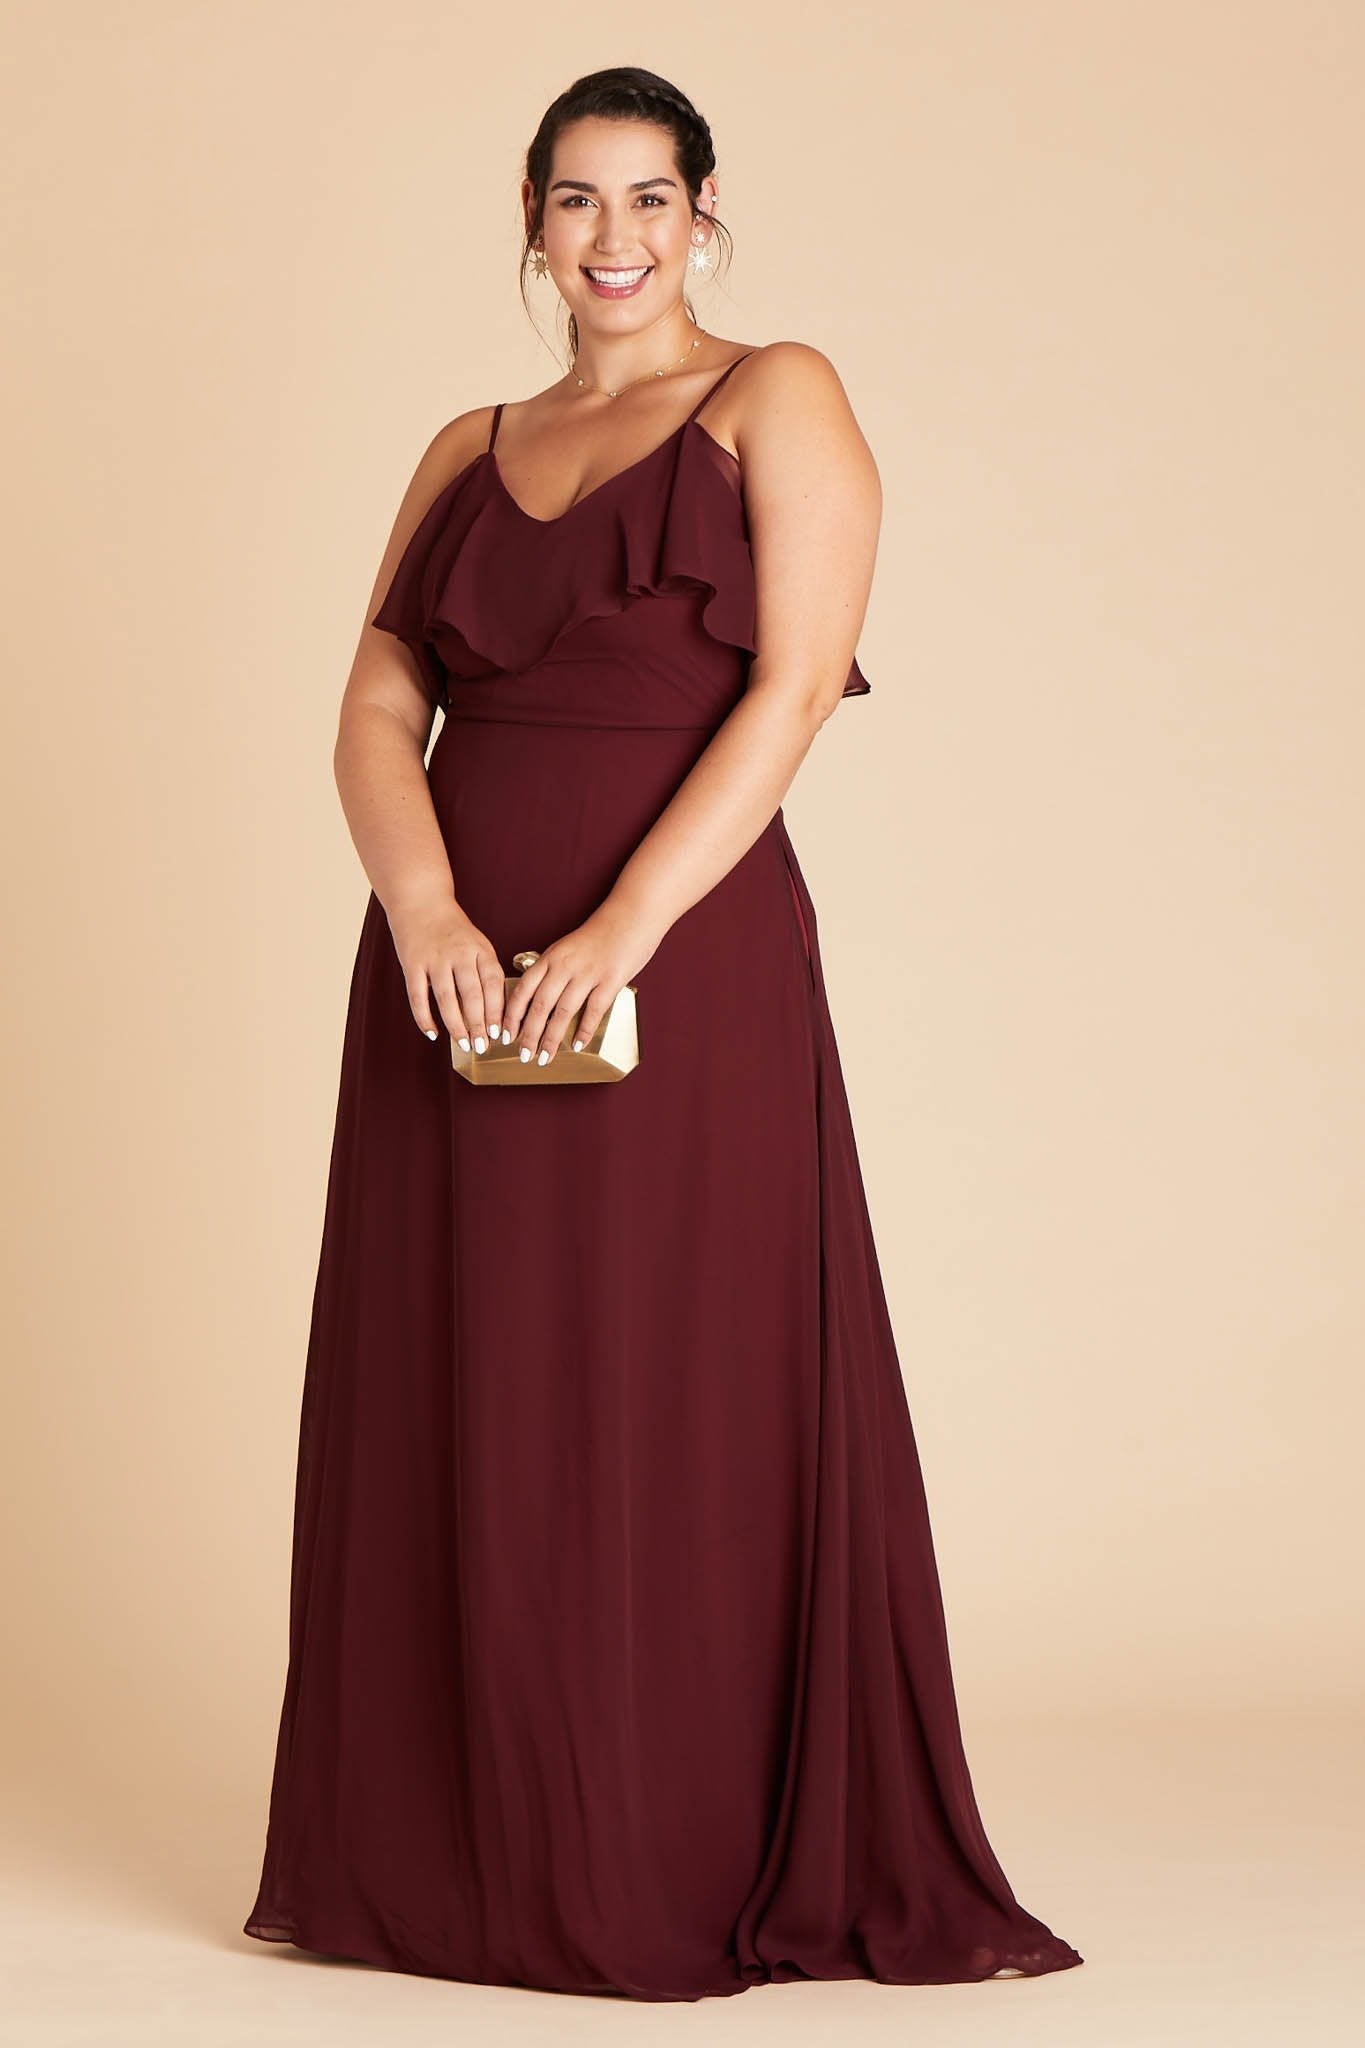 Jane convertible plus size bridesmaid dress in Cabernet Burgundy chiffon by Birdy Grey, front view